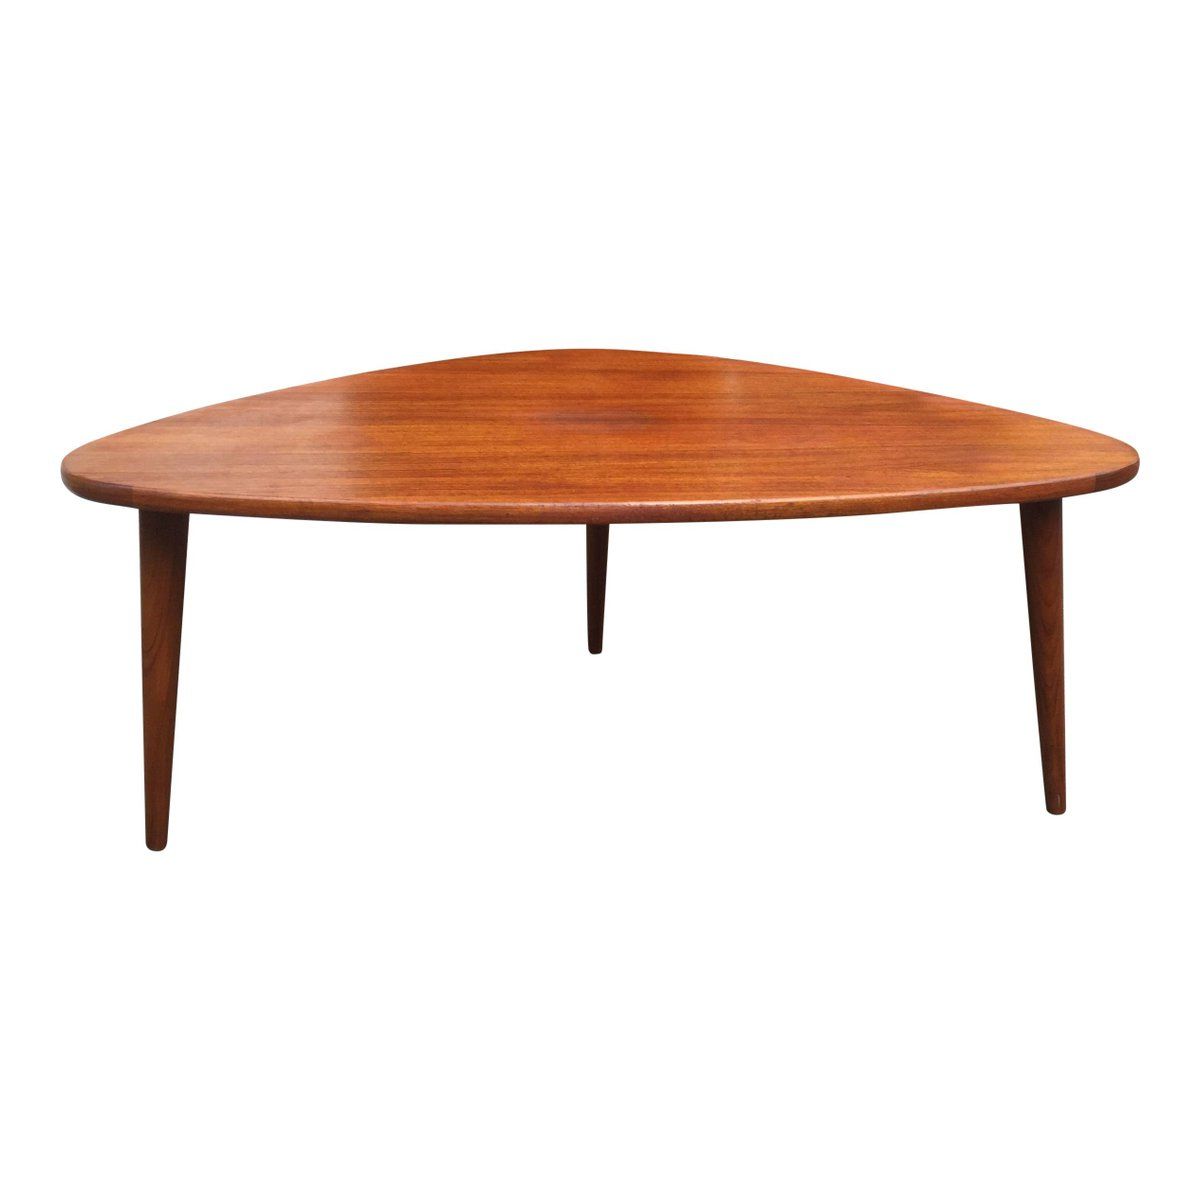 2019 Mid Century Triangular Teak Coffee Table For Sale At Pamono Throughout Triangular Coffee Tables (View 1 of 10)